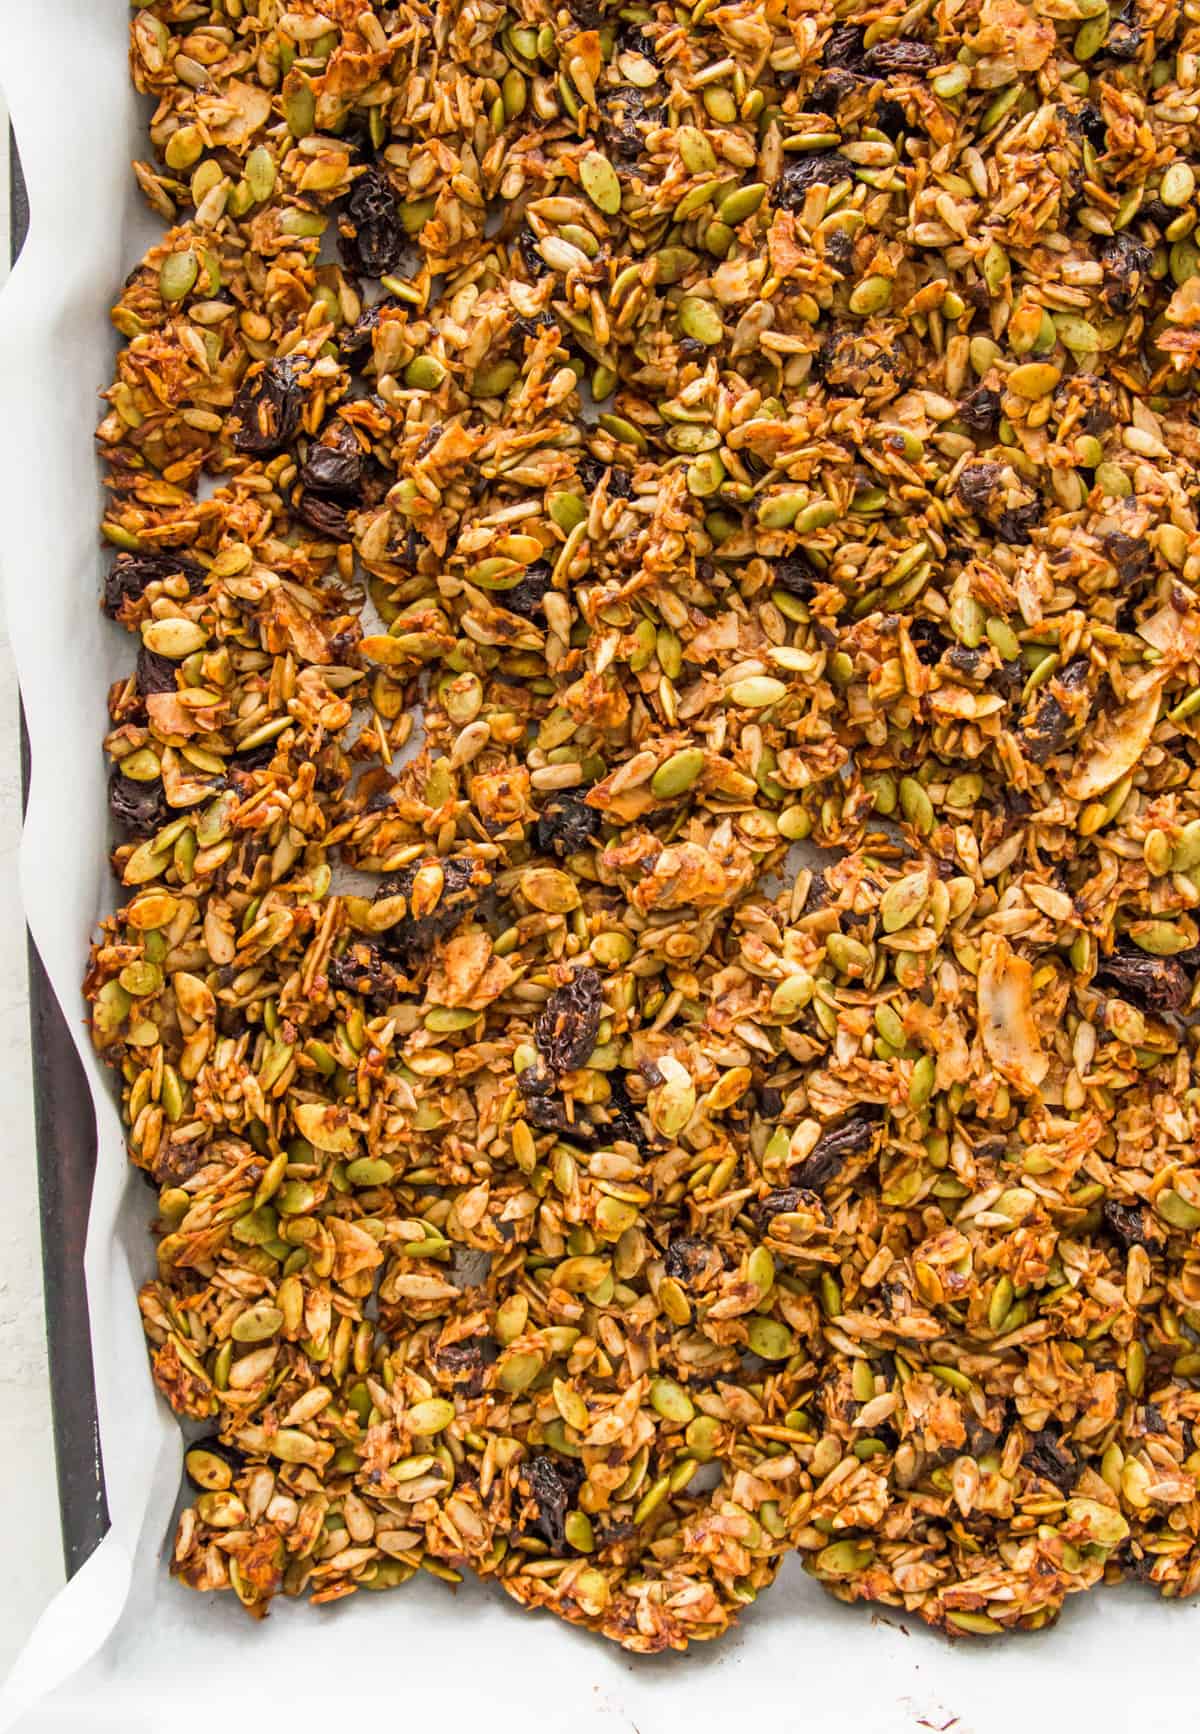 A baking sheet lined with parchment paper with cooked granola on it.